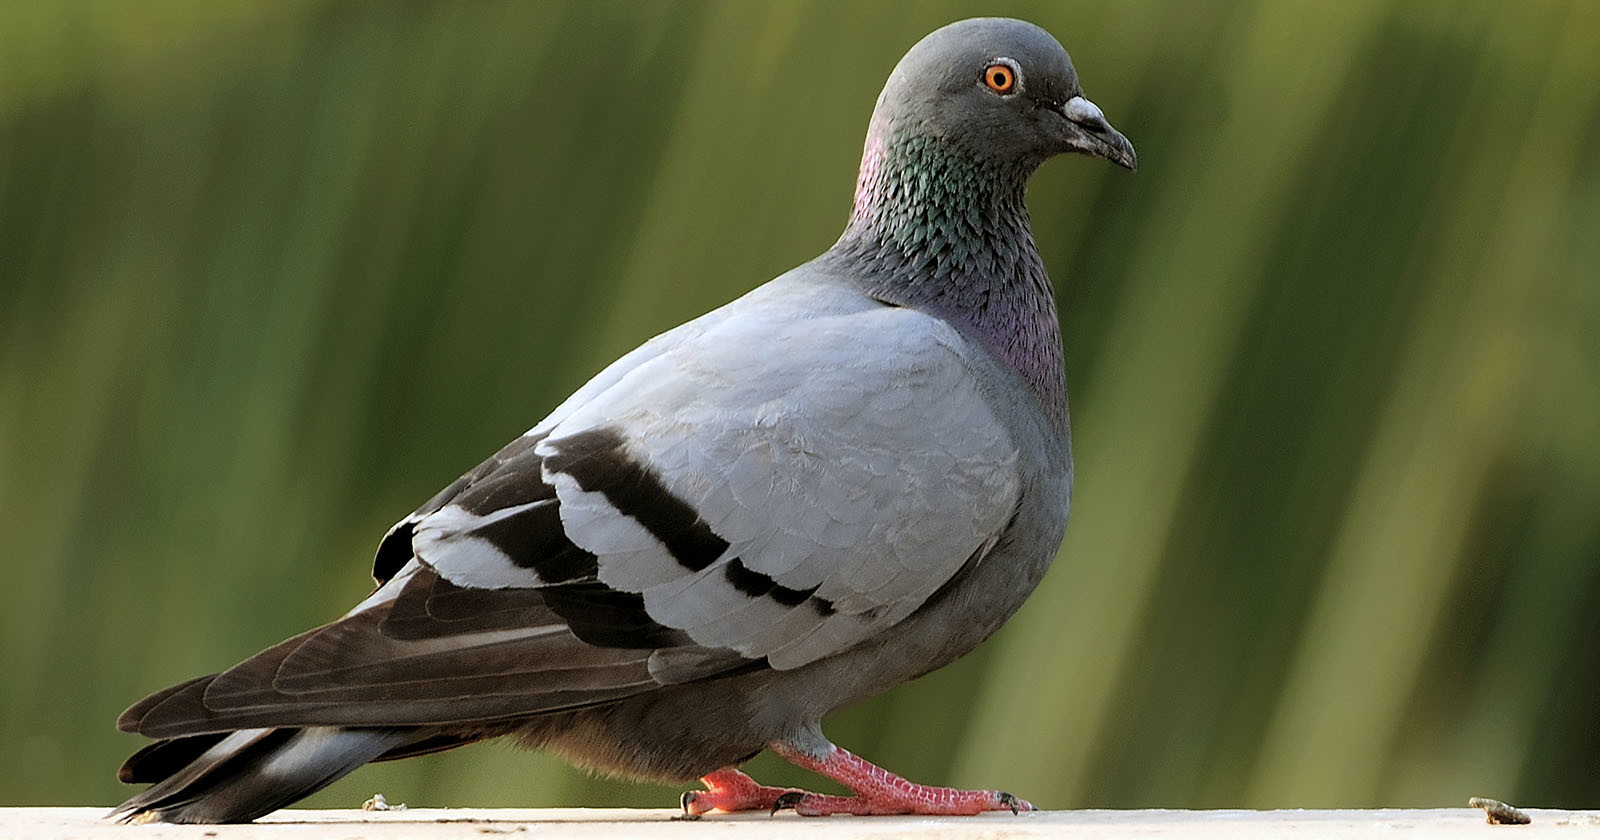 Photographer Wins $1.2 Million After Company Used His Pigeon Photo